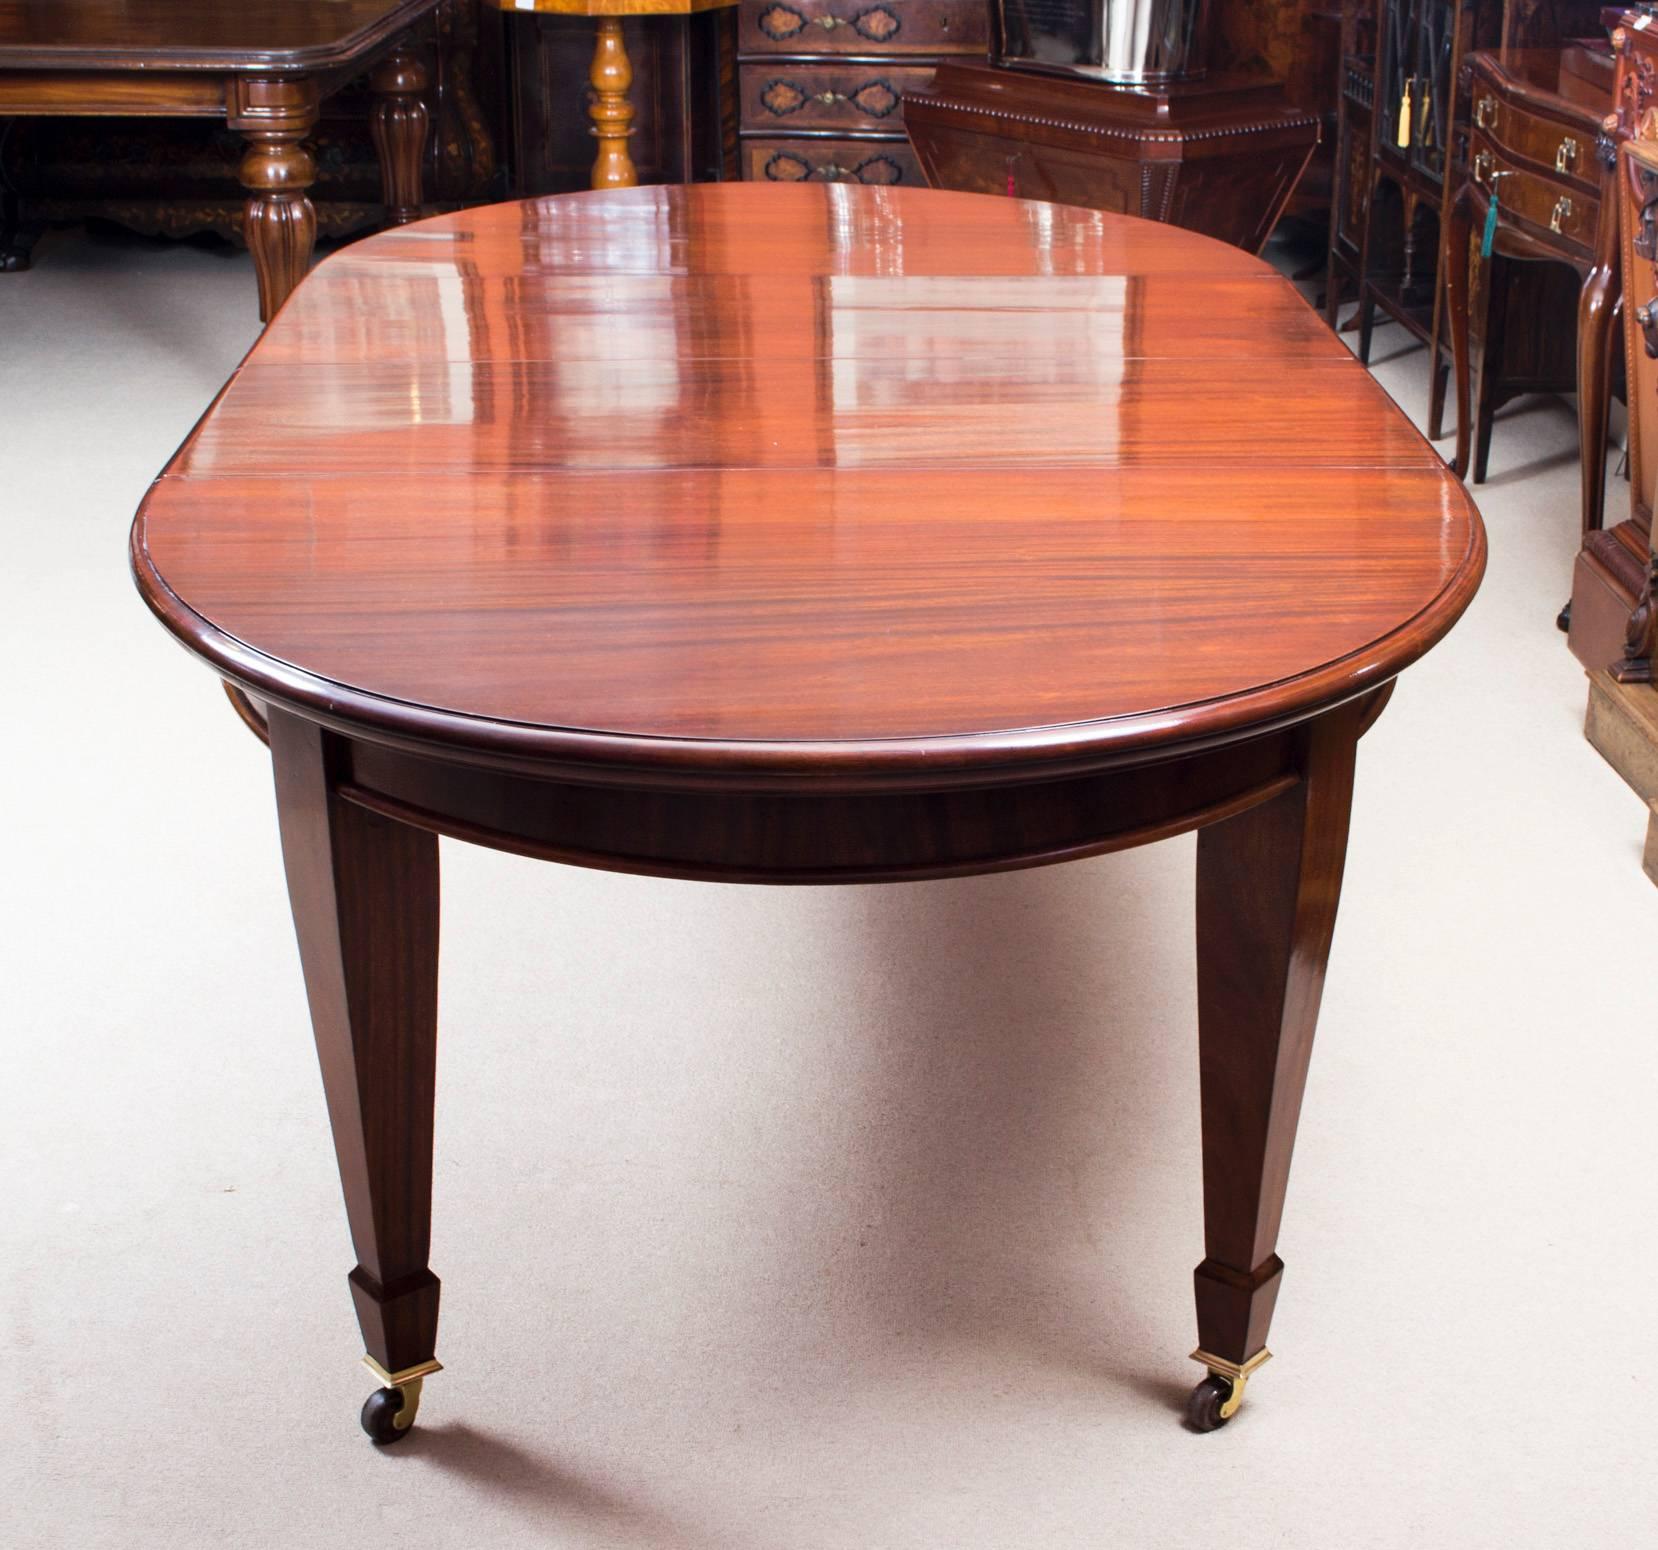 This is a rare opportunity to own an antique 8ft Edwardian oval extending dining table, circa 1900, made of flame mahogany and the matching set of eight vintage Admiralty back dining chairs.

The table has two leaves which can be added or removed